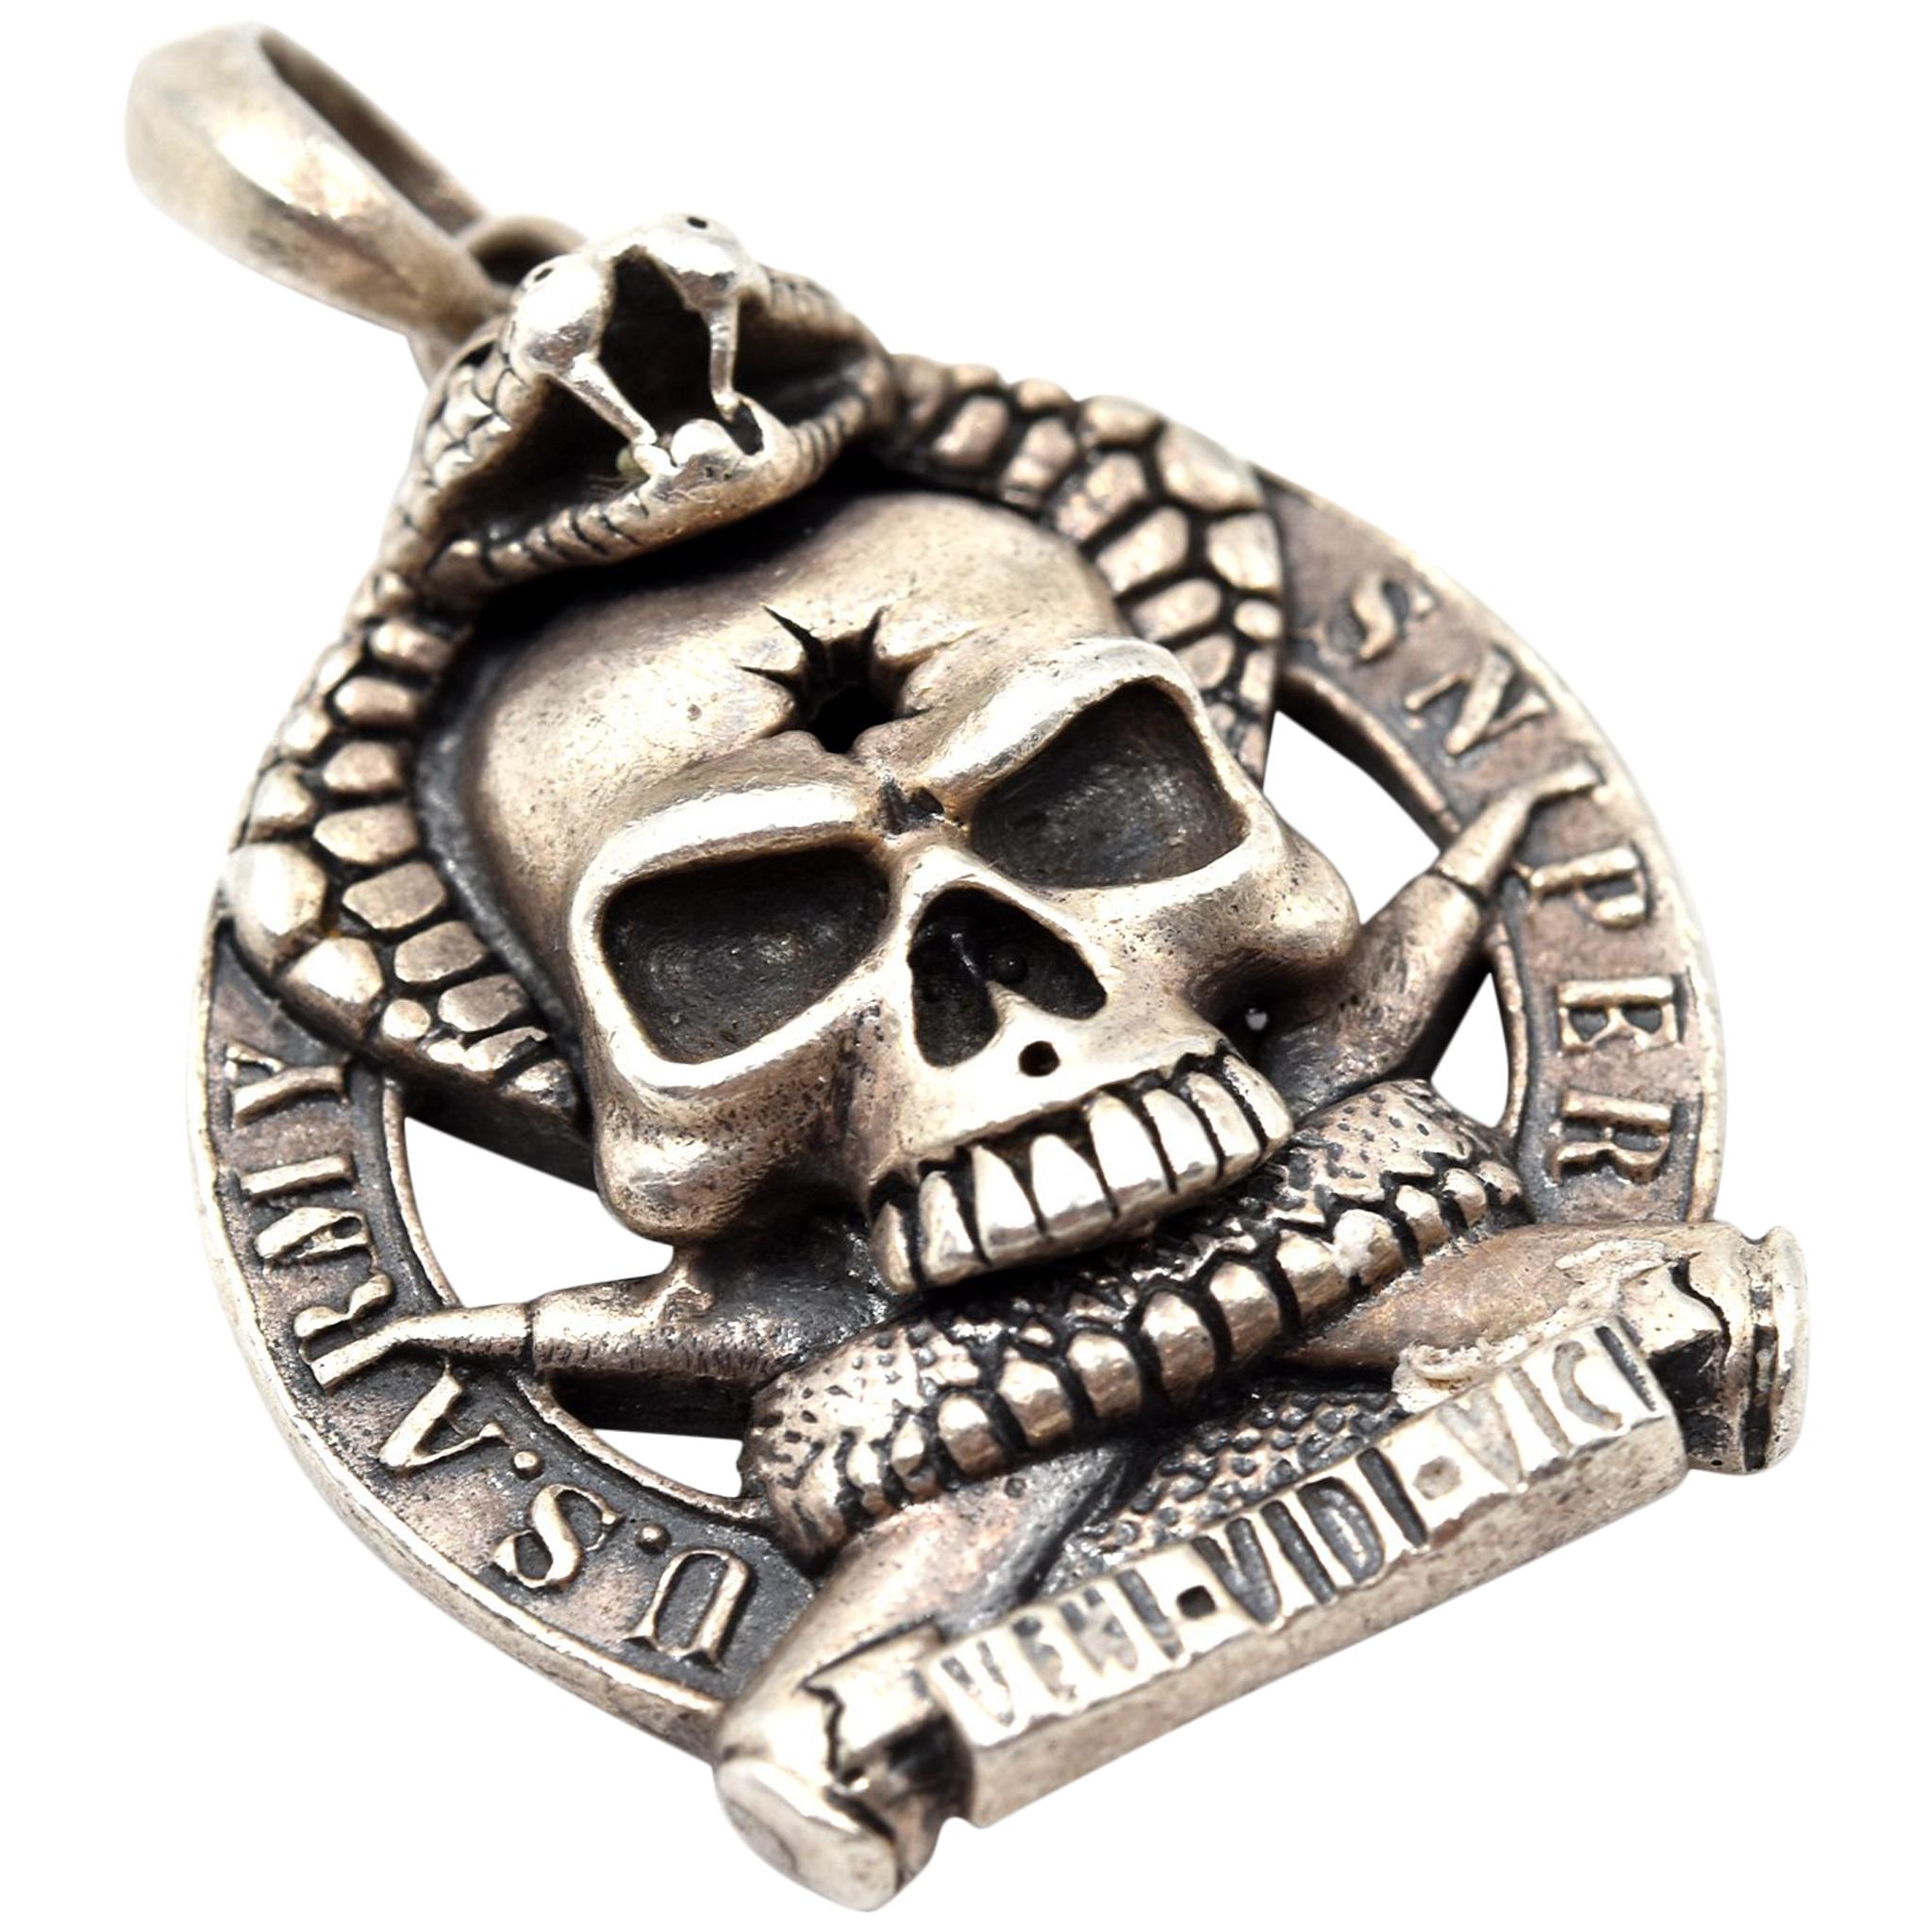 U.S. Army Sniper “One Shot One Kill” Sterling Silver Pendant